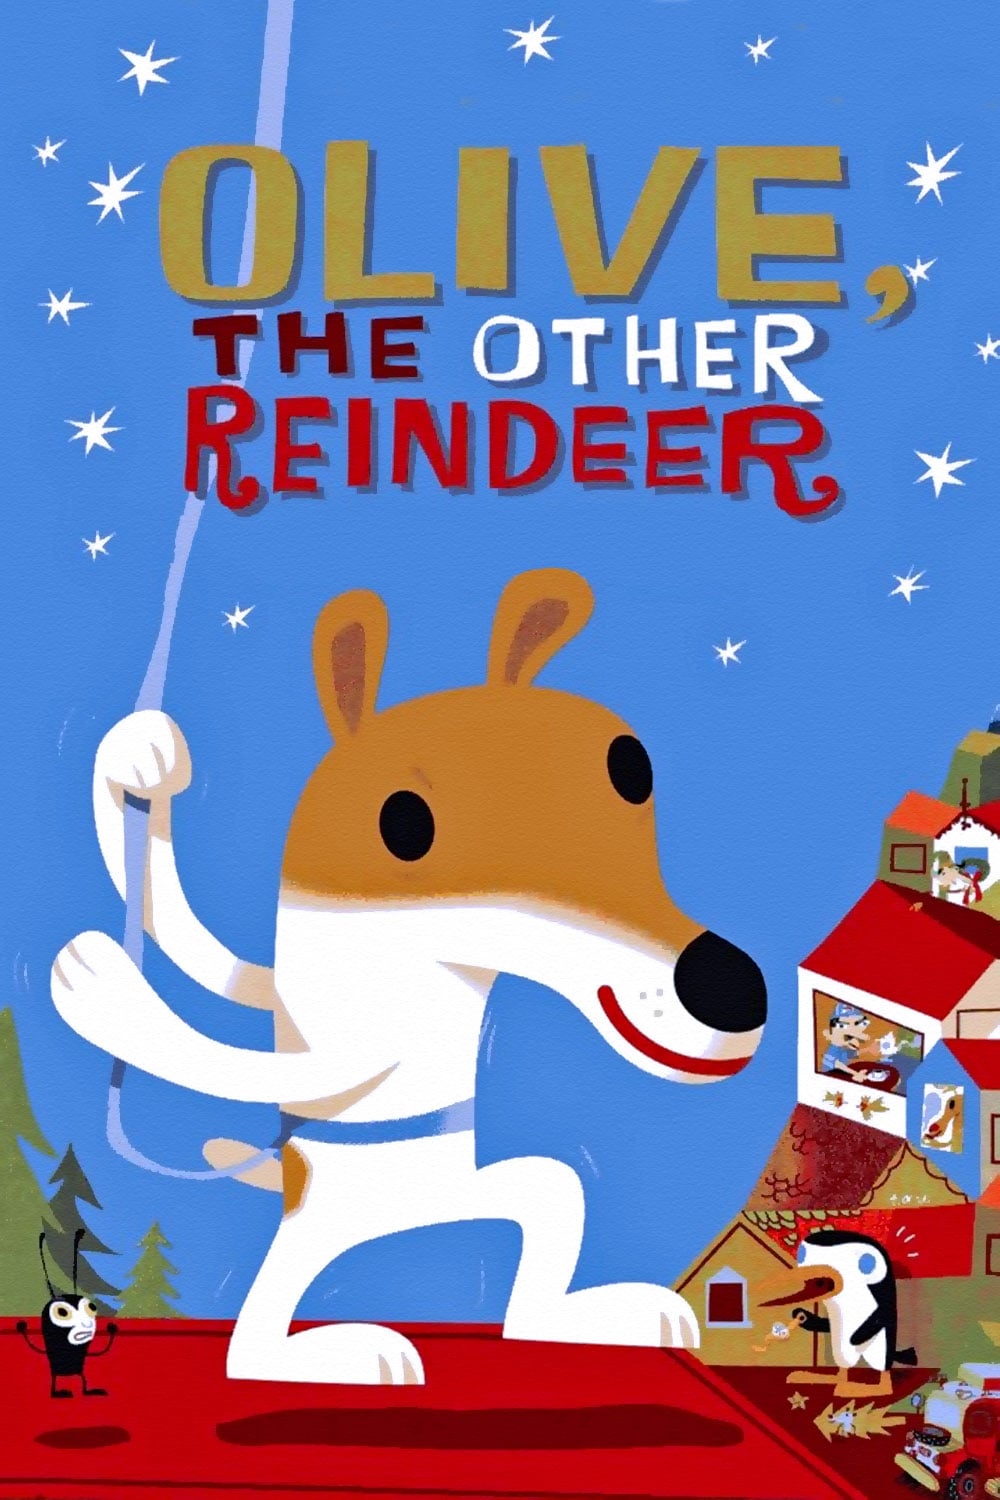 Olive the Other Reindeer (1999)